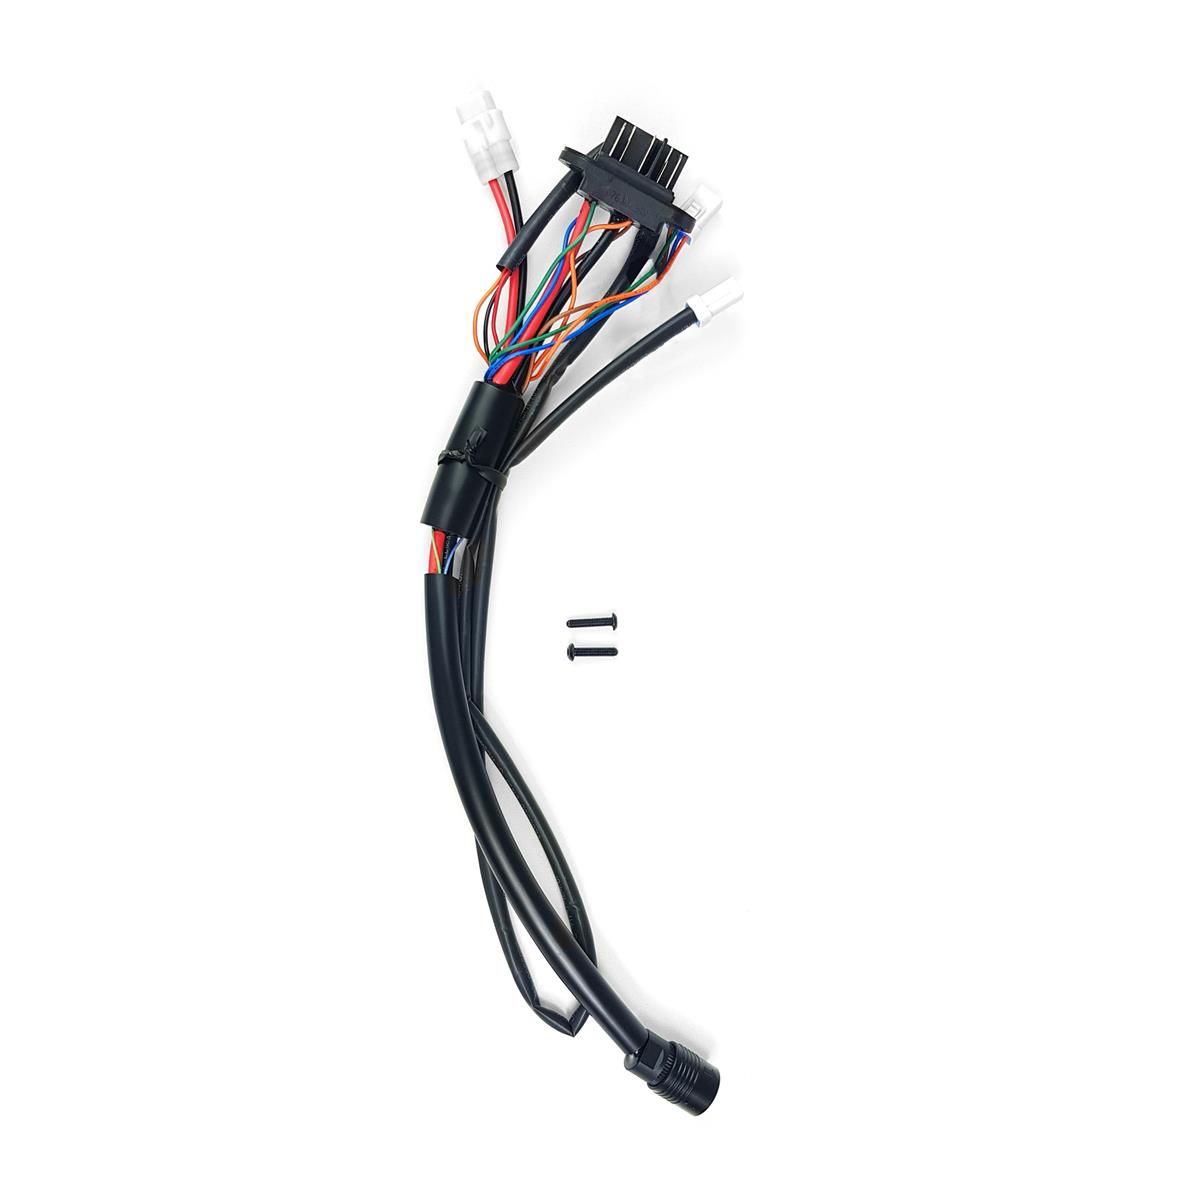 Motor connection cable - 630w battery Simplo Shimano motor